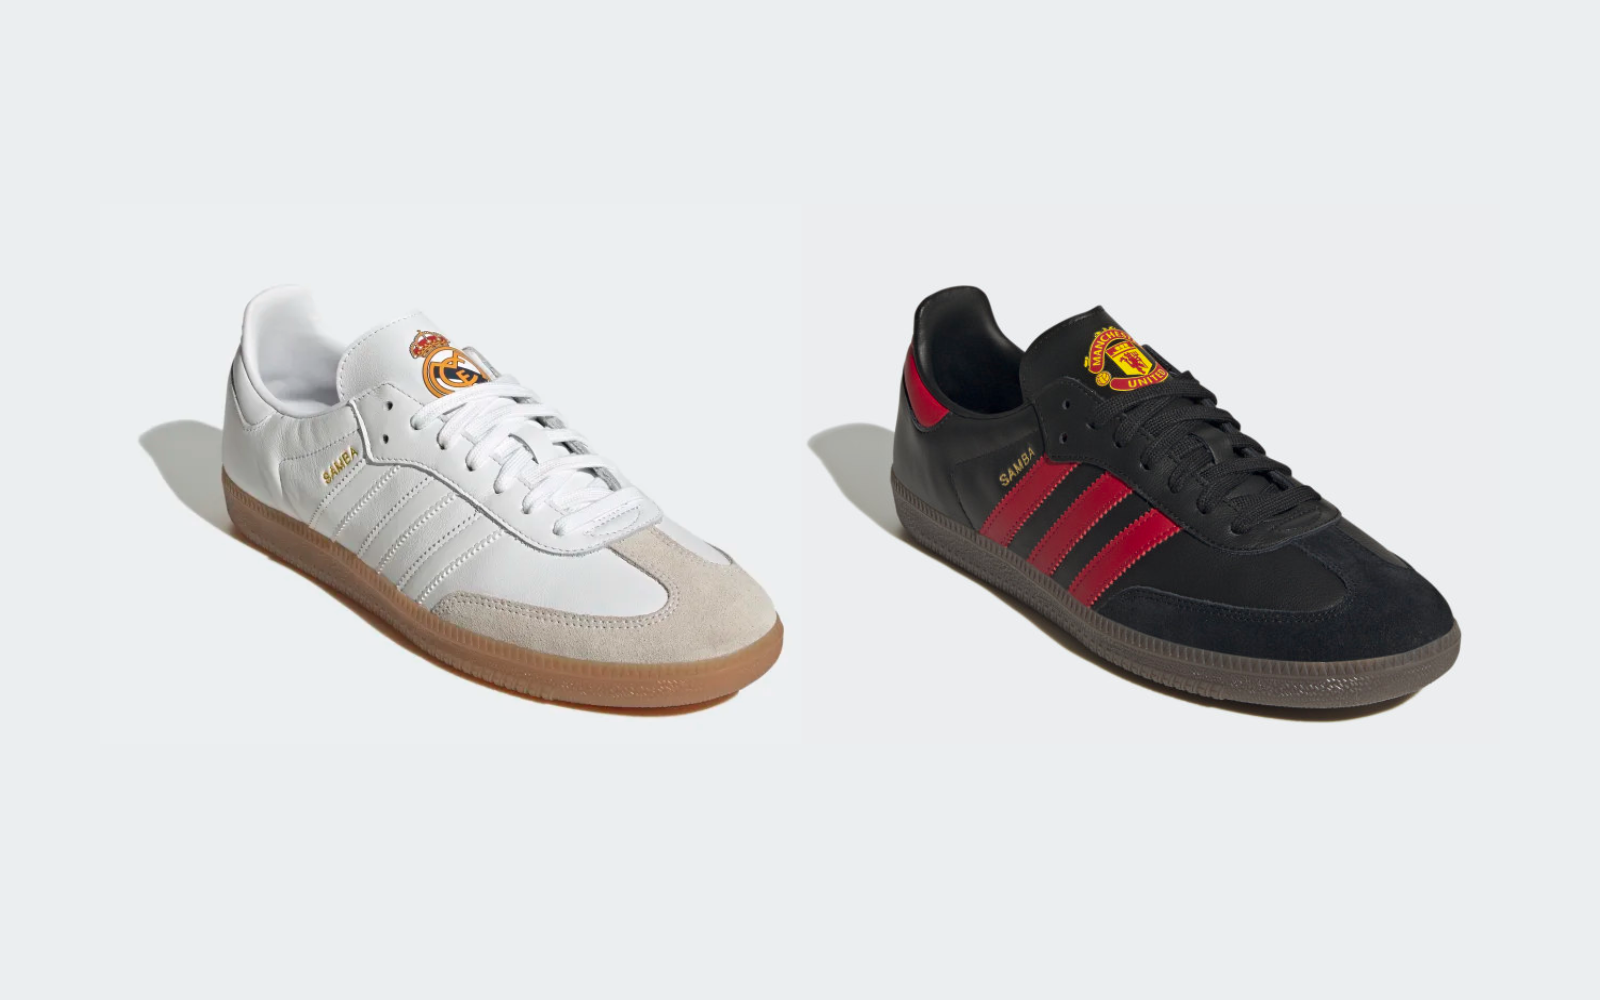 adidas made samba shoes for its top 5 clubs